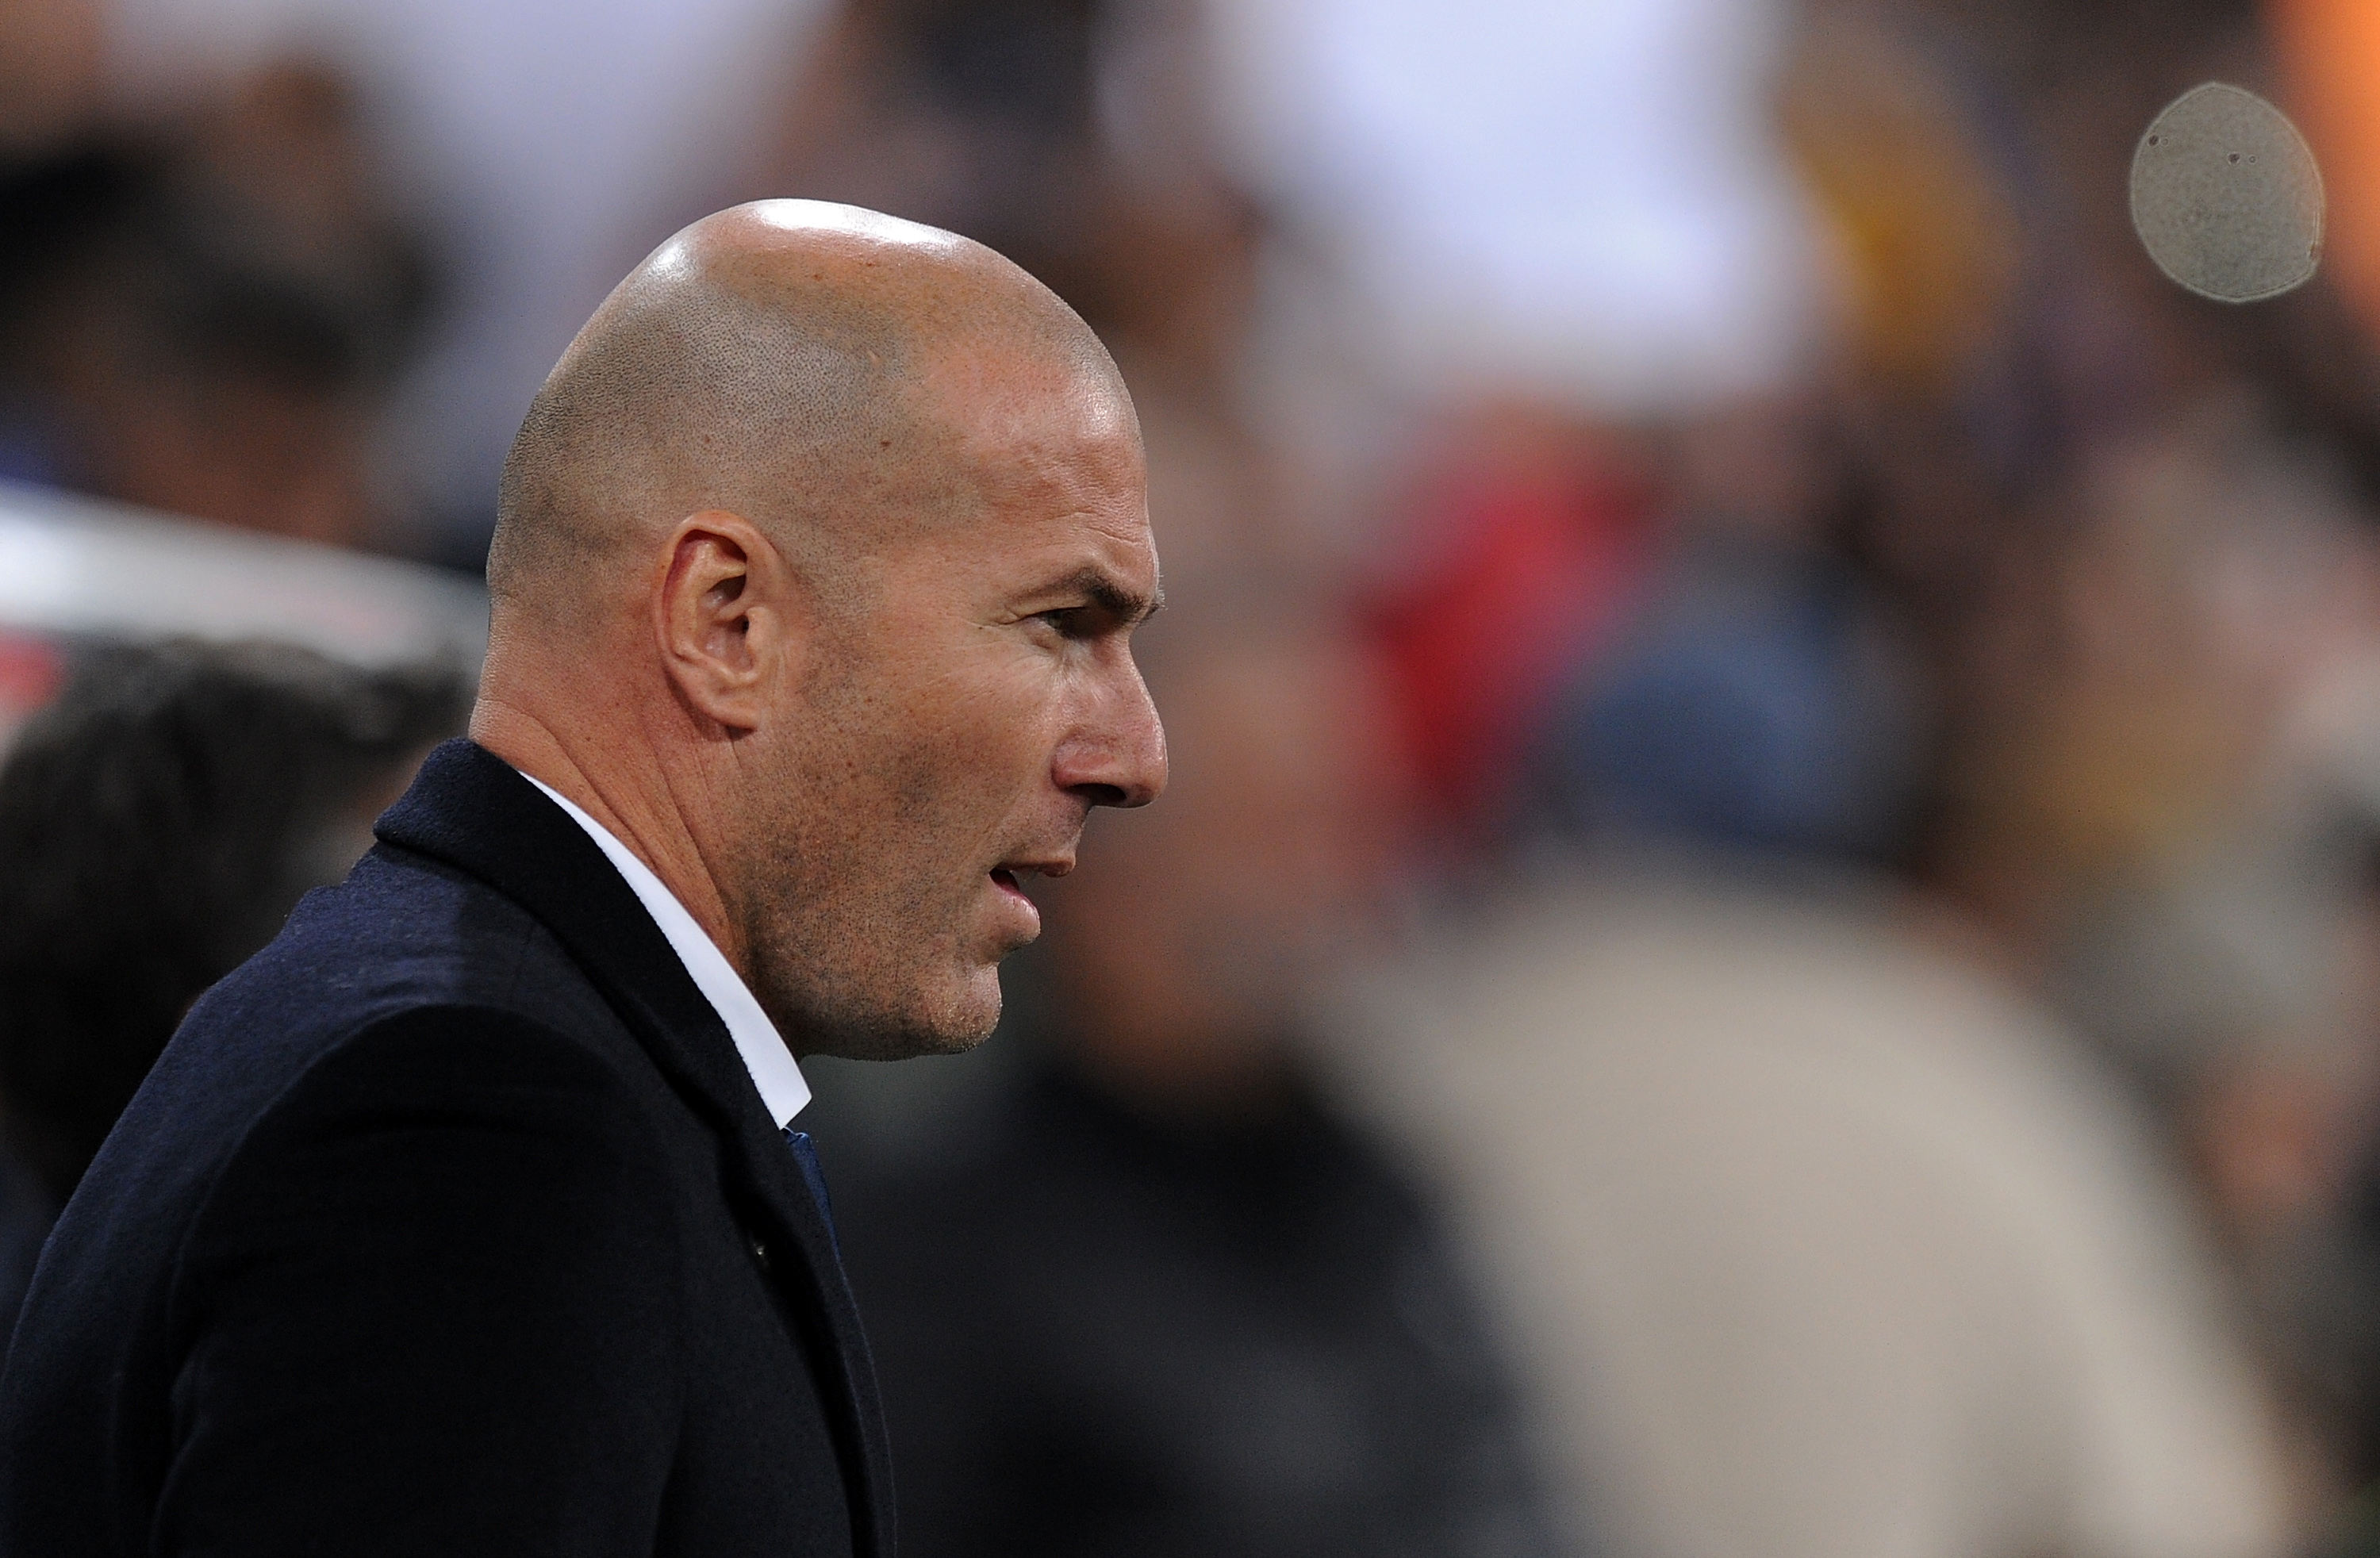 MADRID, SPAIN - JANUARY 04:  Real Madrid manager Zinedine Zidane looks on before the Copa del Rey Round of 16 First Leg match between Real Madrid and Sevilla  at Bernabeu on January 4, 2017 in Madrid, Spain.  (Photo by Denis Doyle/Getty Images)